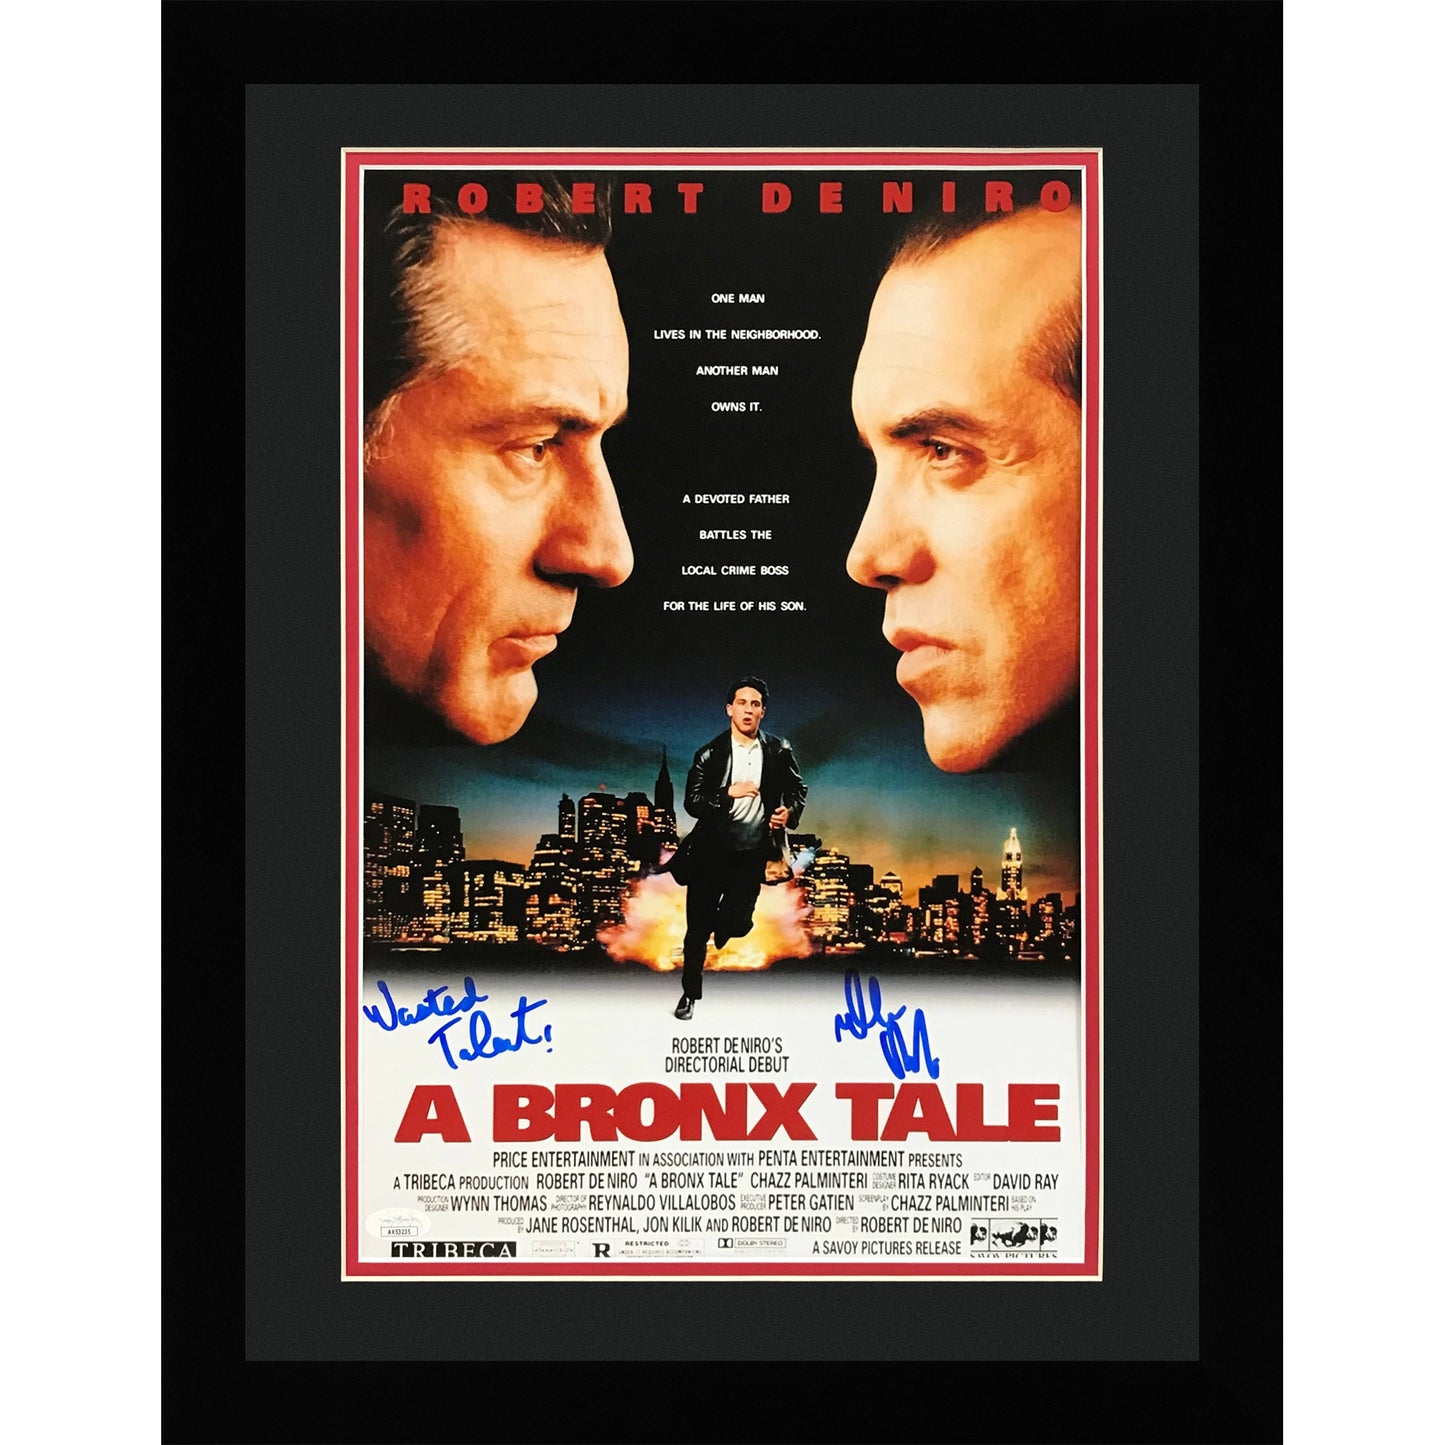 Lillo Brancato C Autographed A Bronx Tale Deluxe Framed 11x14 Movie Poster w/ Wasted Talent - JSA